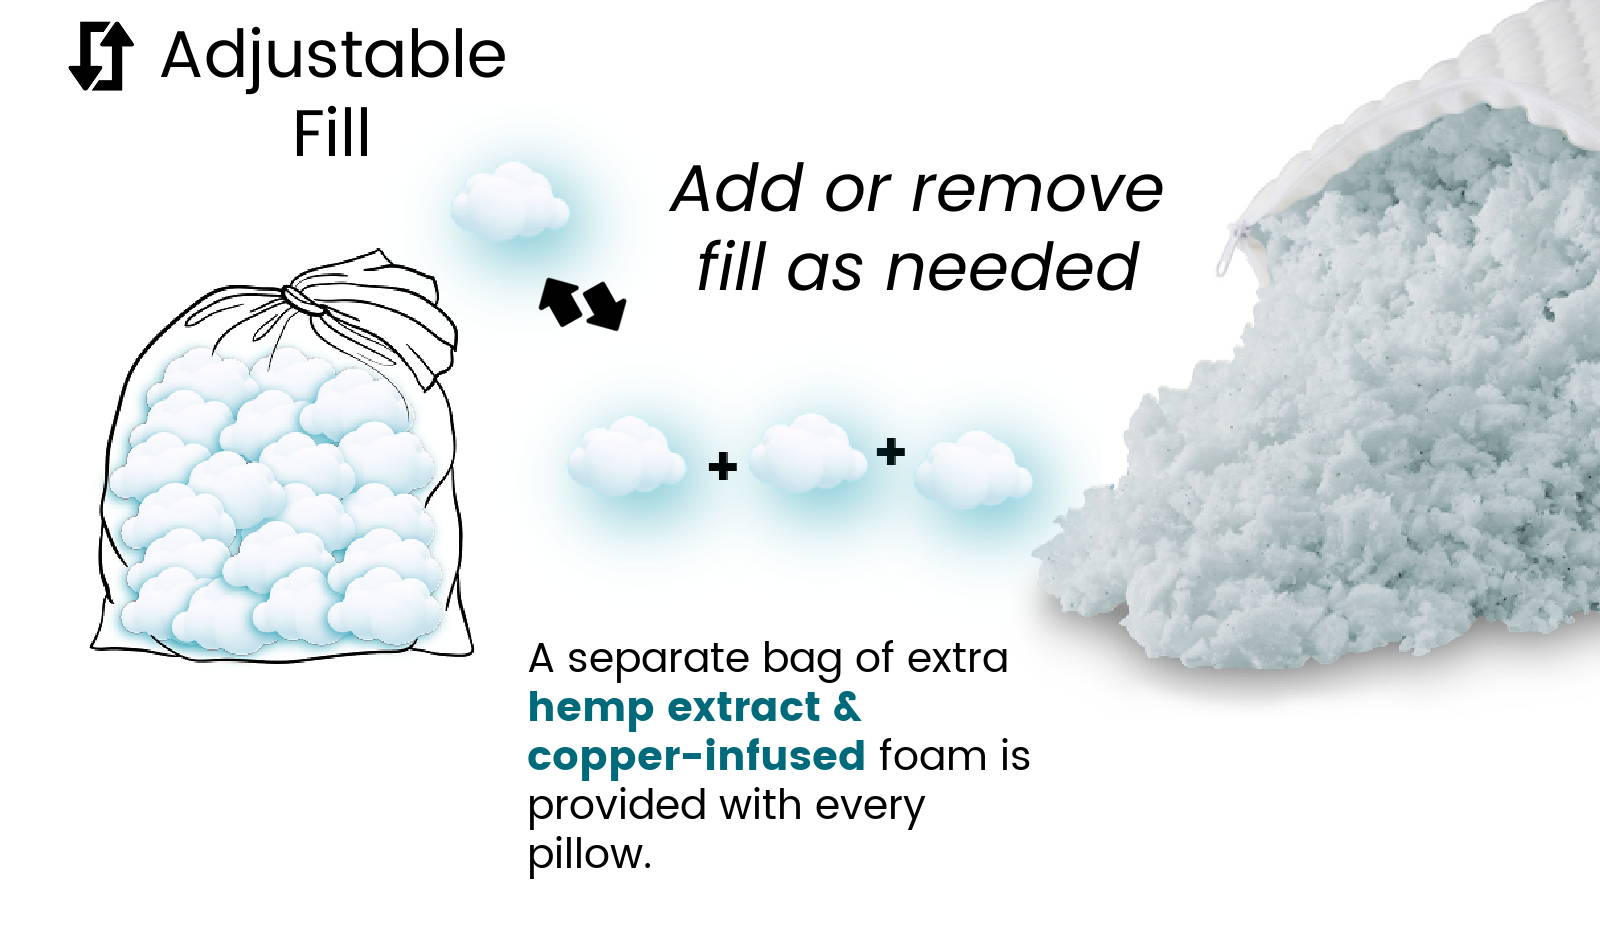 An open pillow with the adjustable fill CBD and copper gel memory foam spilling out and an extra bag of foam so you can add or remove fill as needed for the best comfort. A separate bag of fill comes with your pillow.